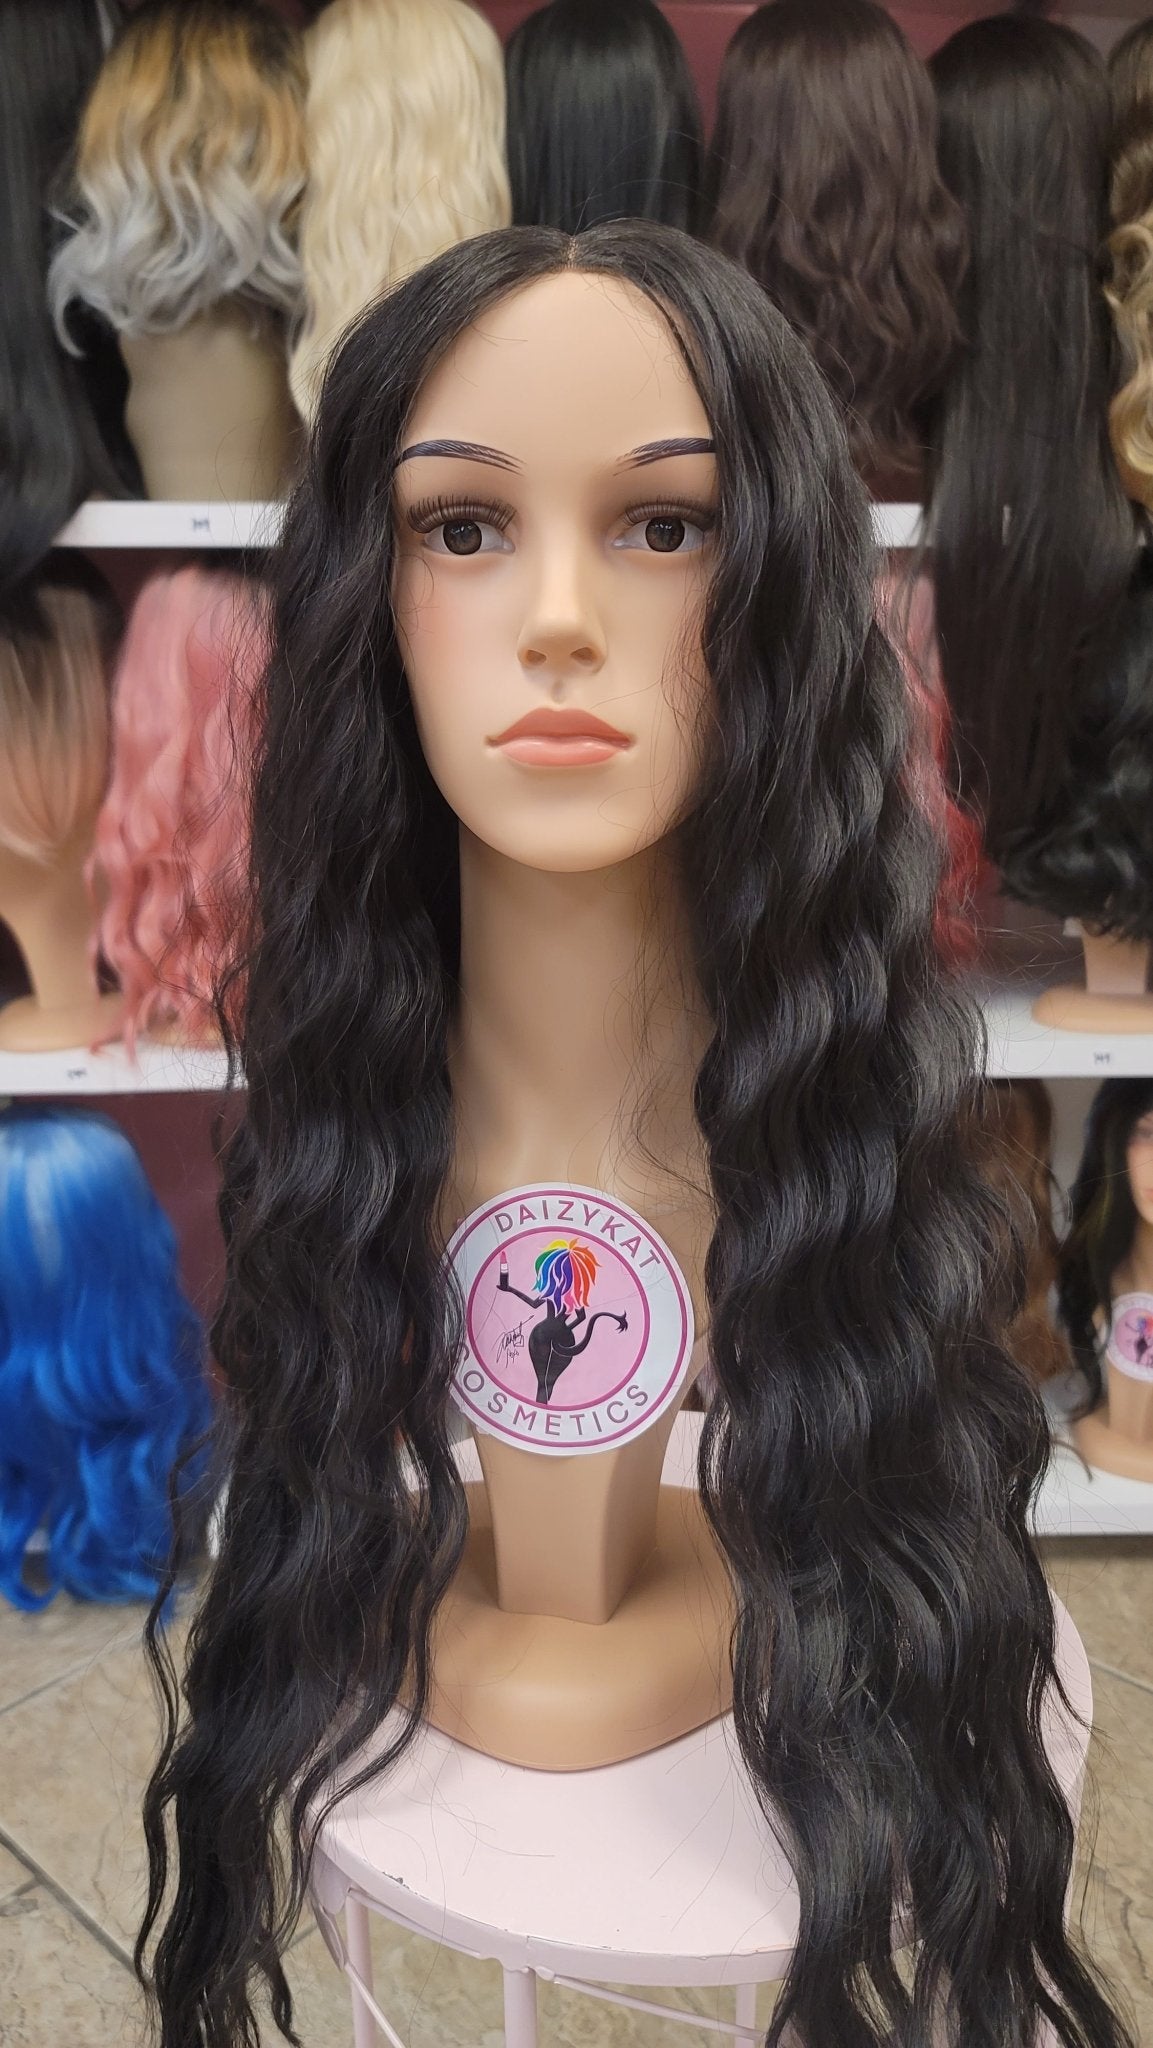 247 Brittney - Middle Part Lace Front Wig Human Hair Blend- 2 - DaizyKat Cosmetics 247 Brittney - Middle Part Lace Front Wig Human Hair Blend- 2 DaizyKat Cosmetics Wigs